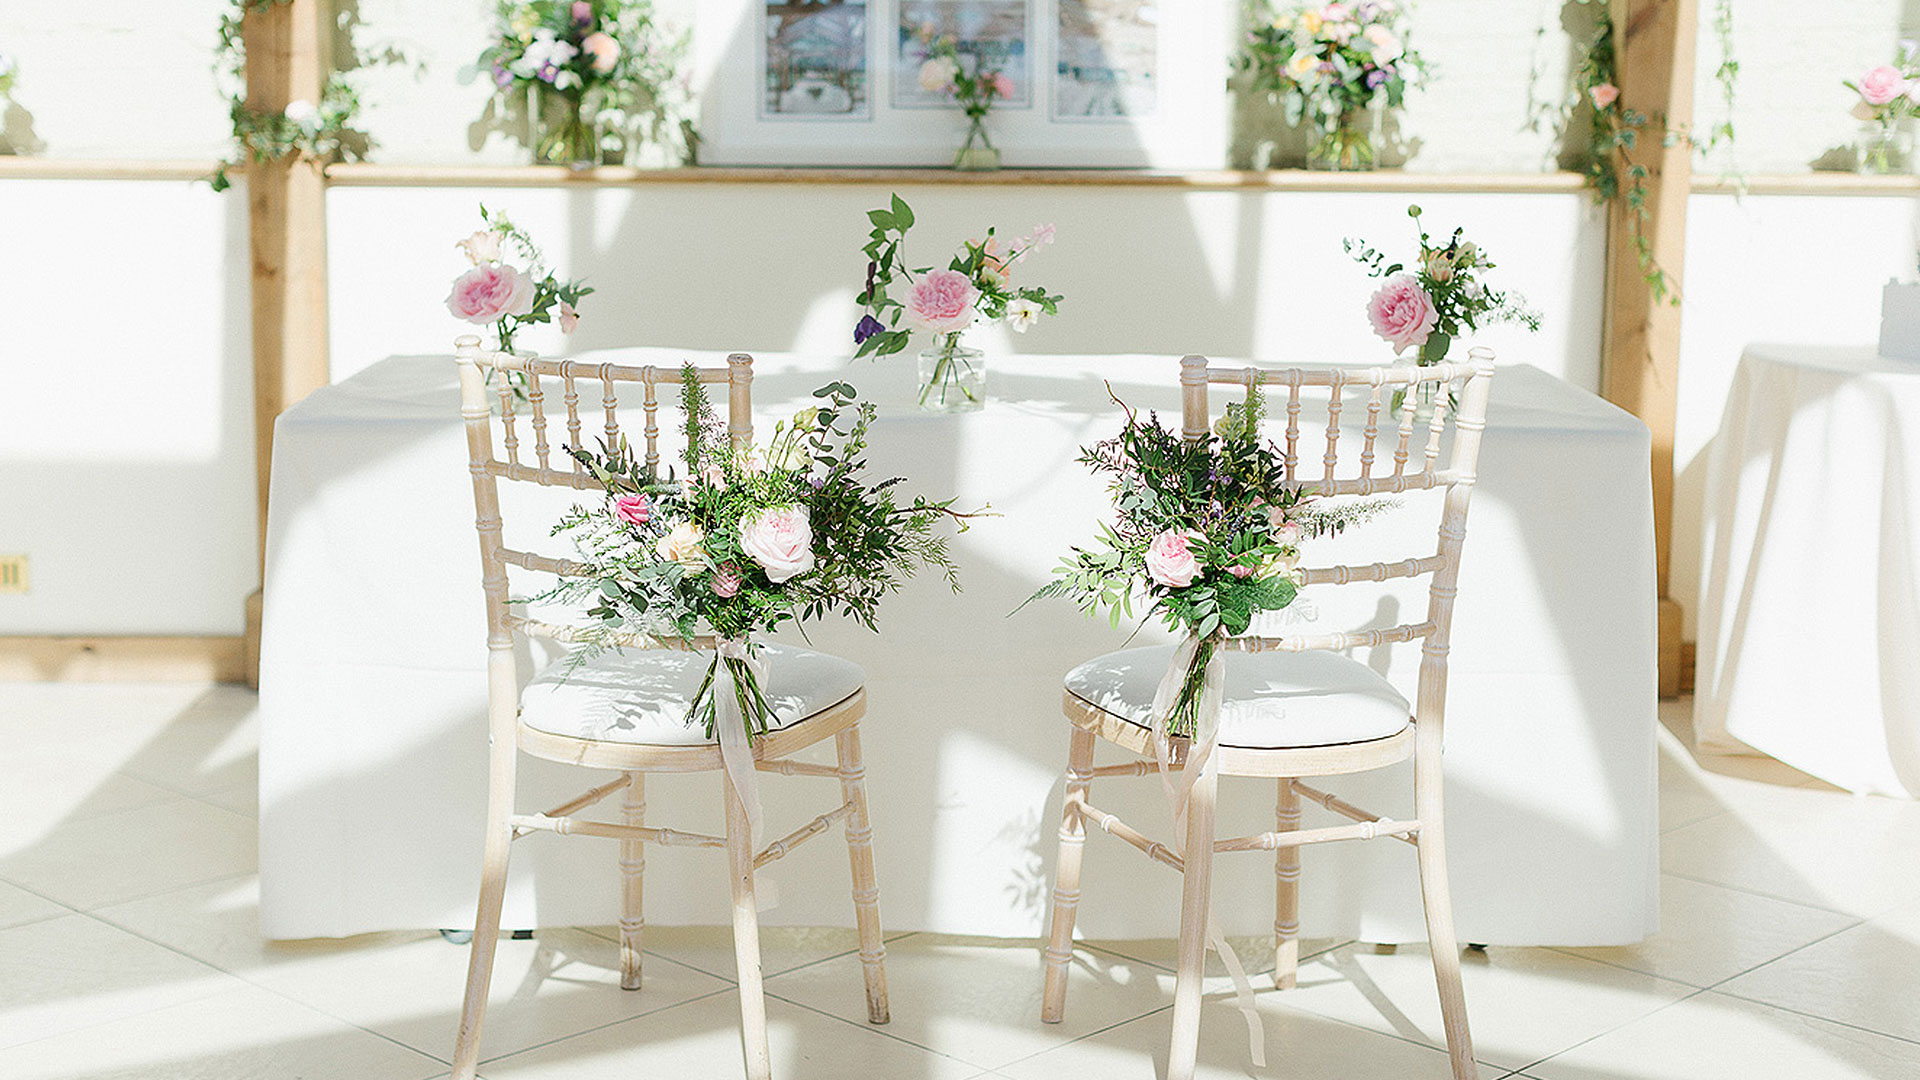 Flowers adorn wooden chairs at this pretty summer wedding at Gaynes Park wedding venue in Esssex